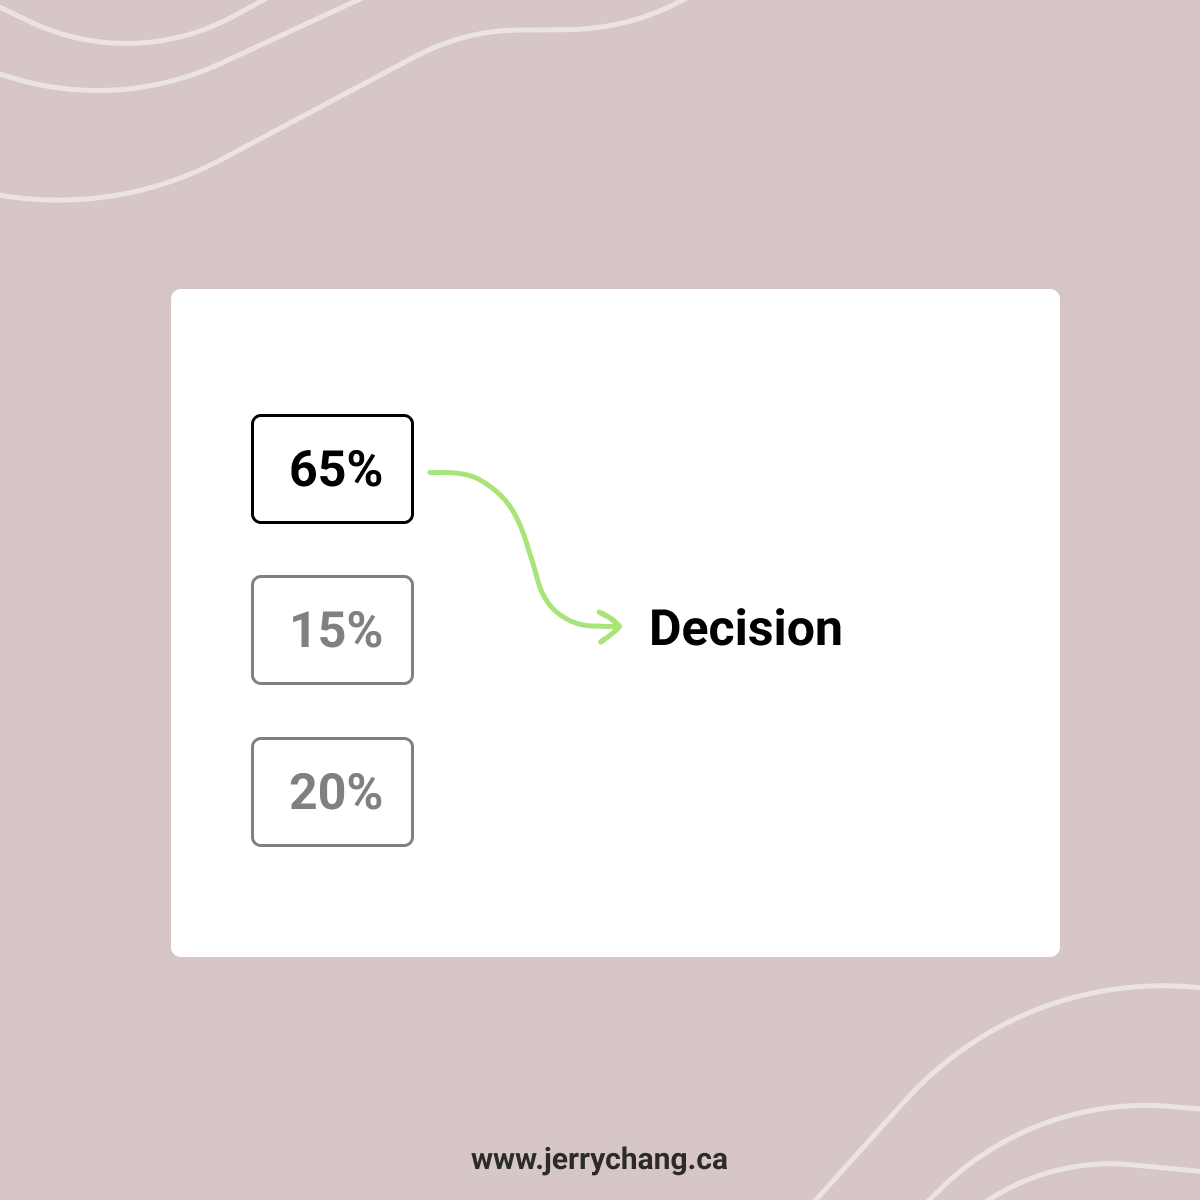 Meehl’s statistical method for decision making visualized